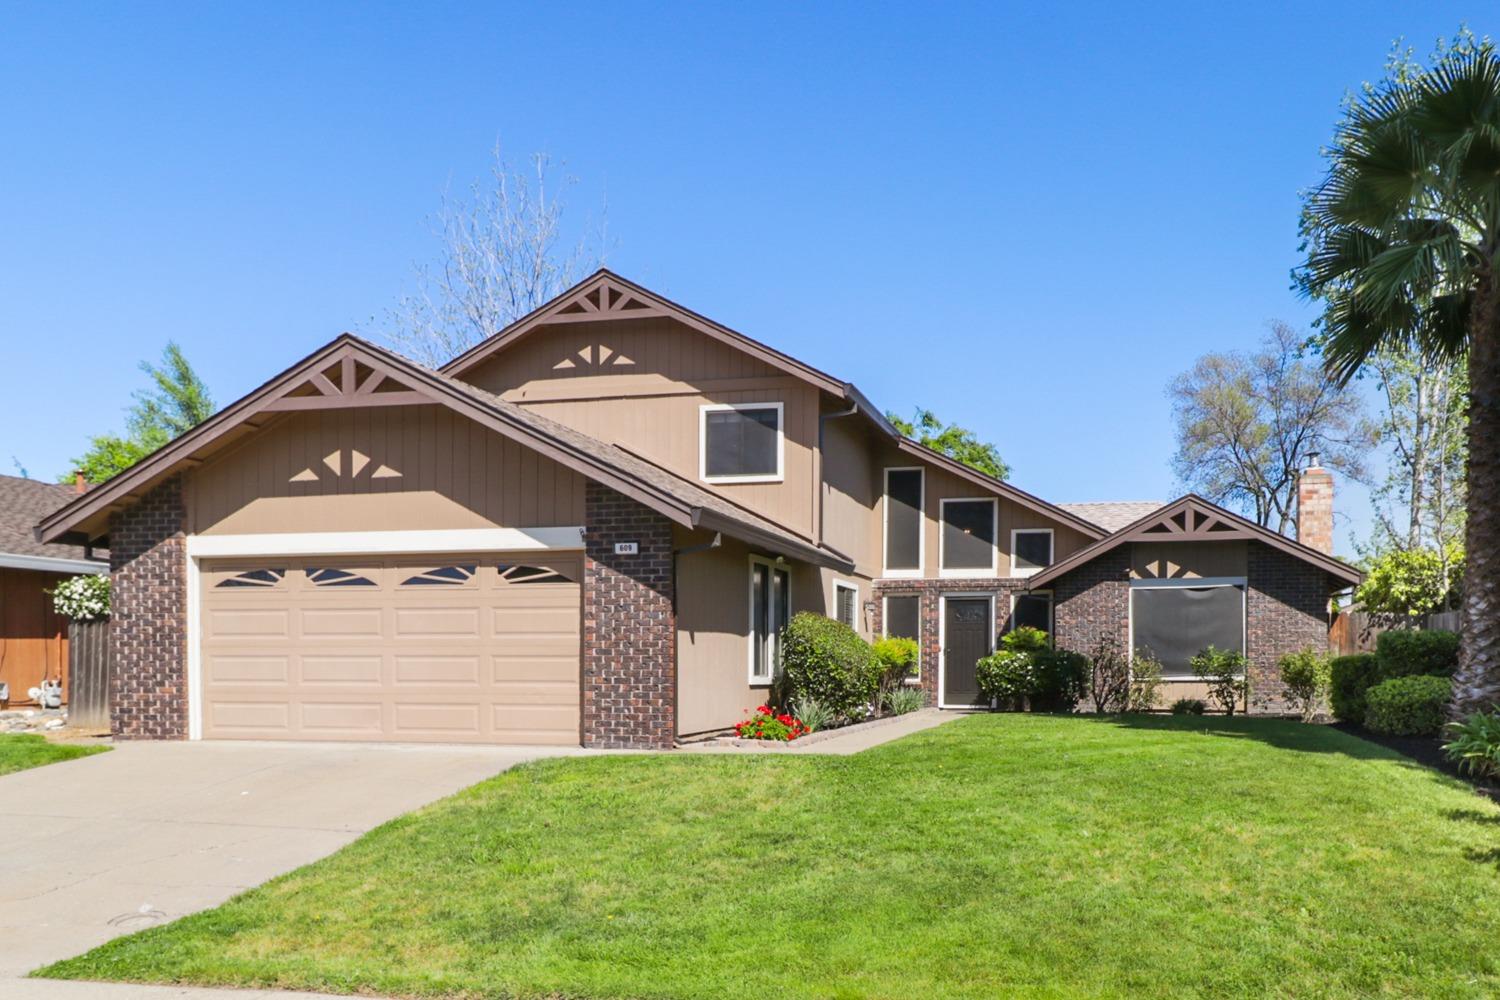 Photo of 609 Andress Ct in Roseville, CA